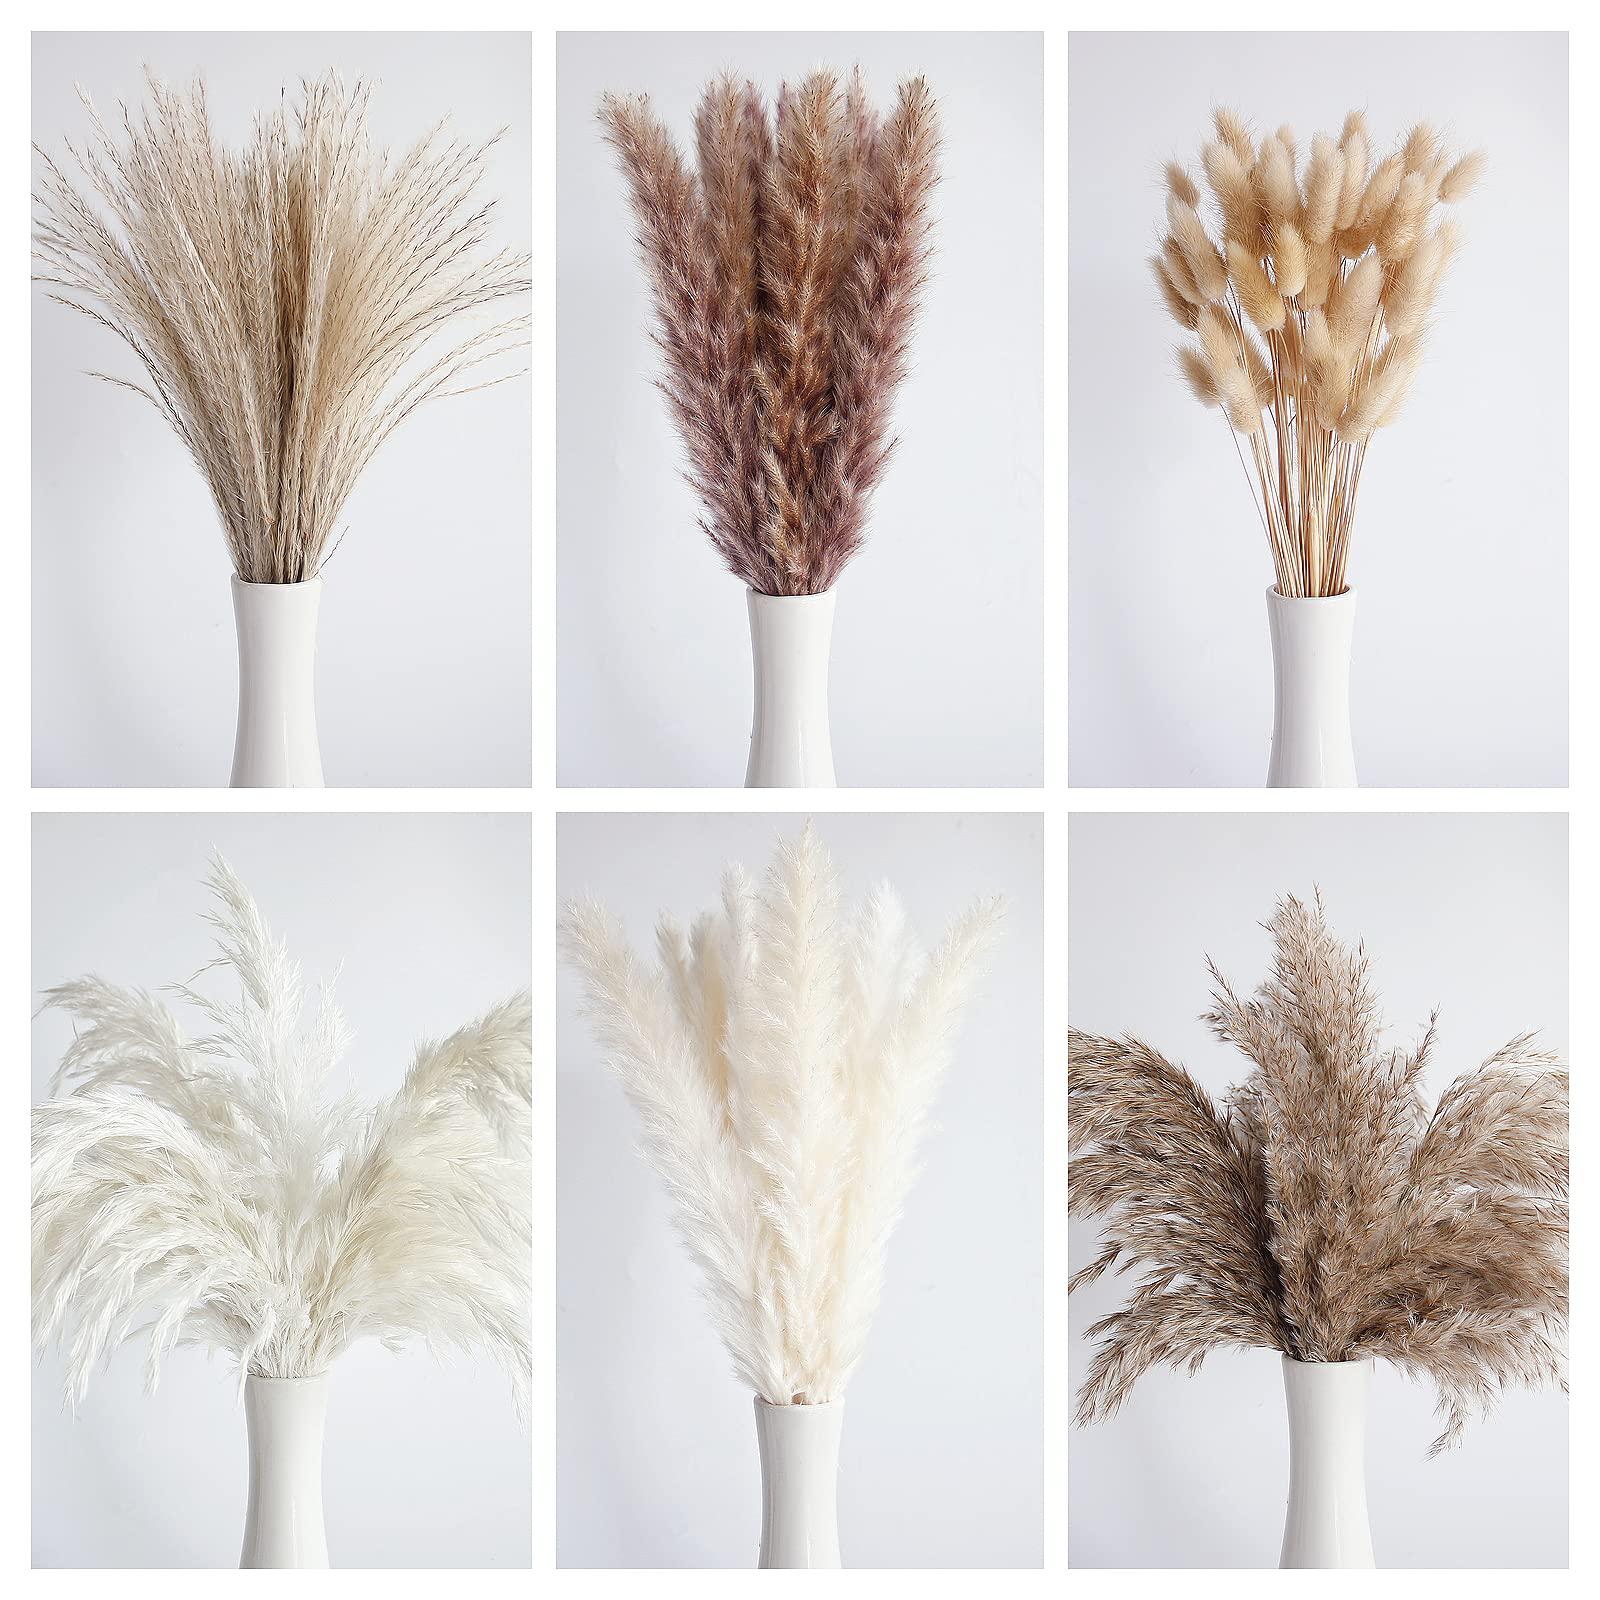 Bannifll 110 pcs dried pampas grass bouquet, boho table decor, bunny tails dried flowers, brown pompas, white pampas grass for wedding